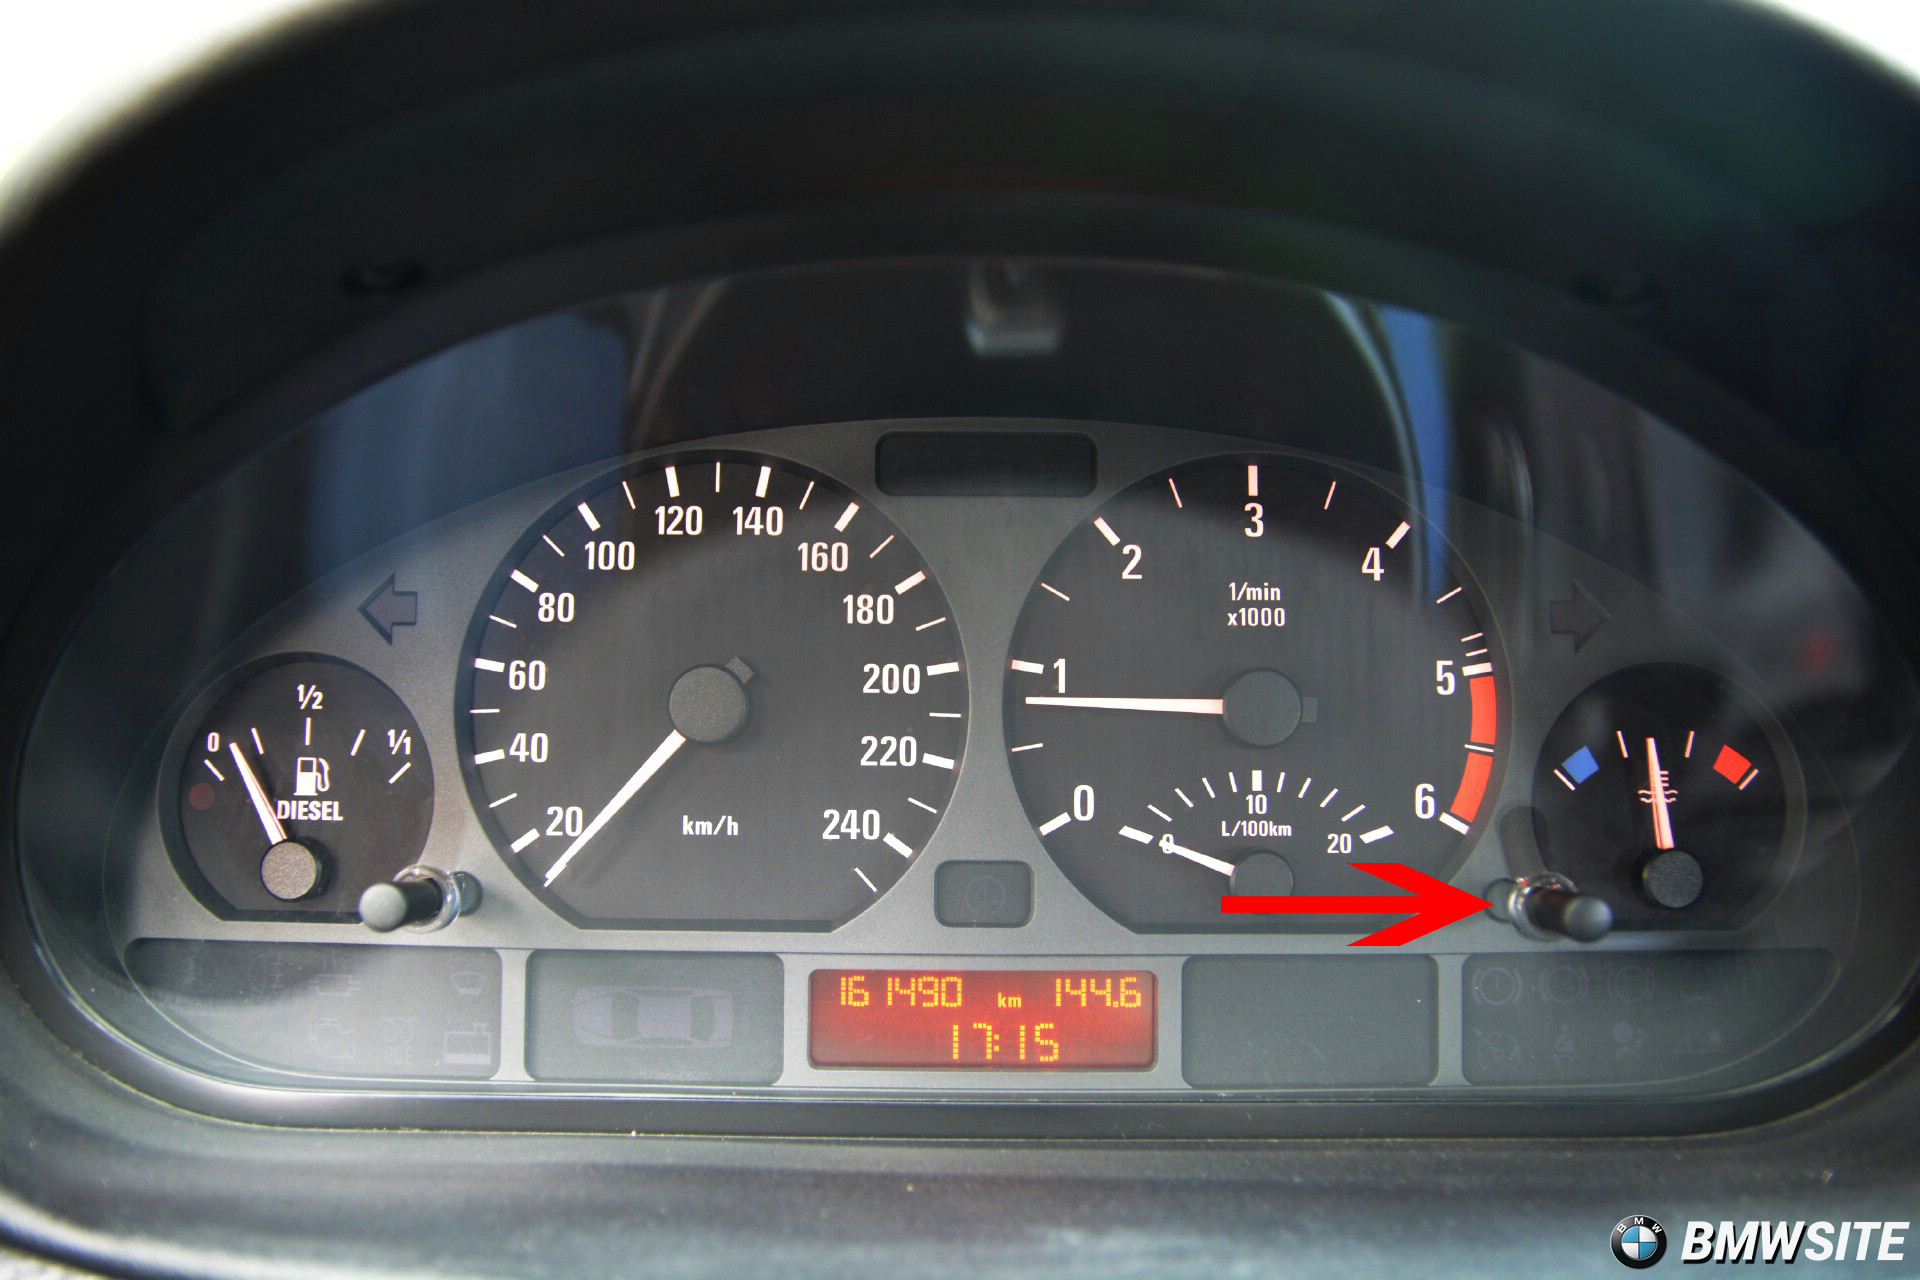 [DIY] How To Set the Clock Time on E46 BMW 3 Series (1)